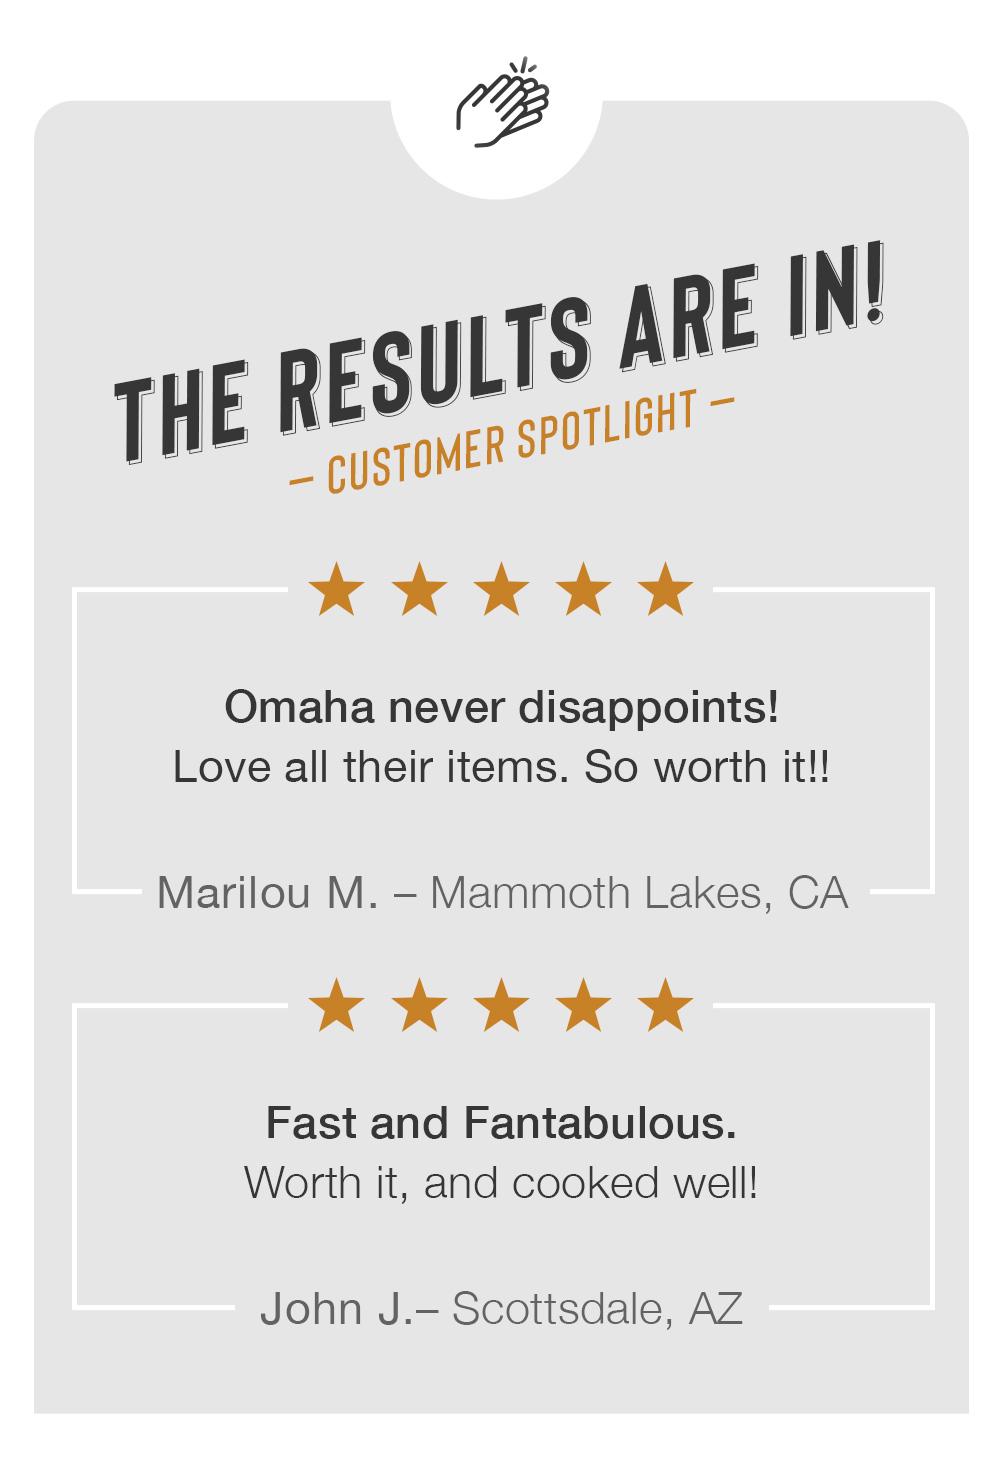 THE RESULTS ARE IN | CUSTOMER SPOTLIGHT | "Omaha never disappoints! Love all their items. So worth it!!" Marilou M. – Mammoth Lakes, CA | "Fast and Fantabulous. Worth it, and cooked well!" John J.– Scottsdale, AZ